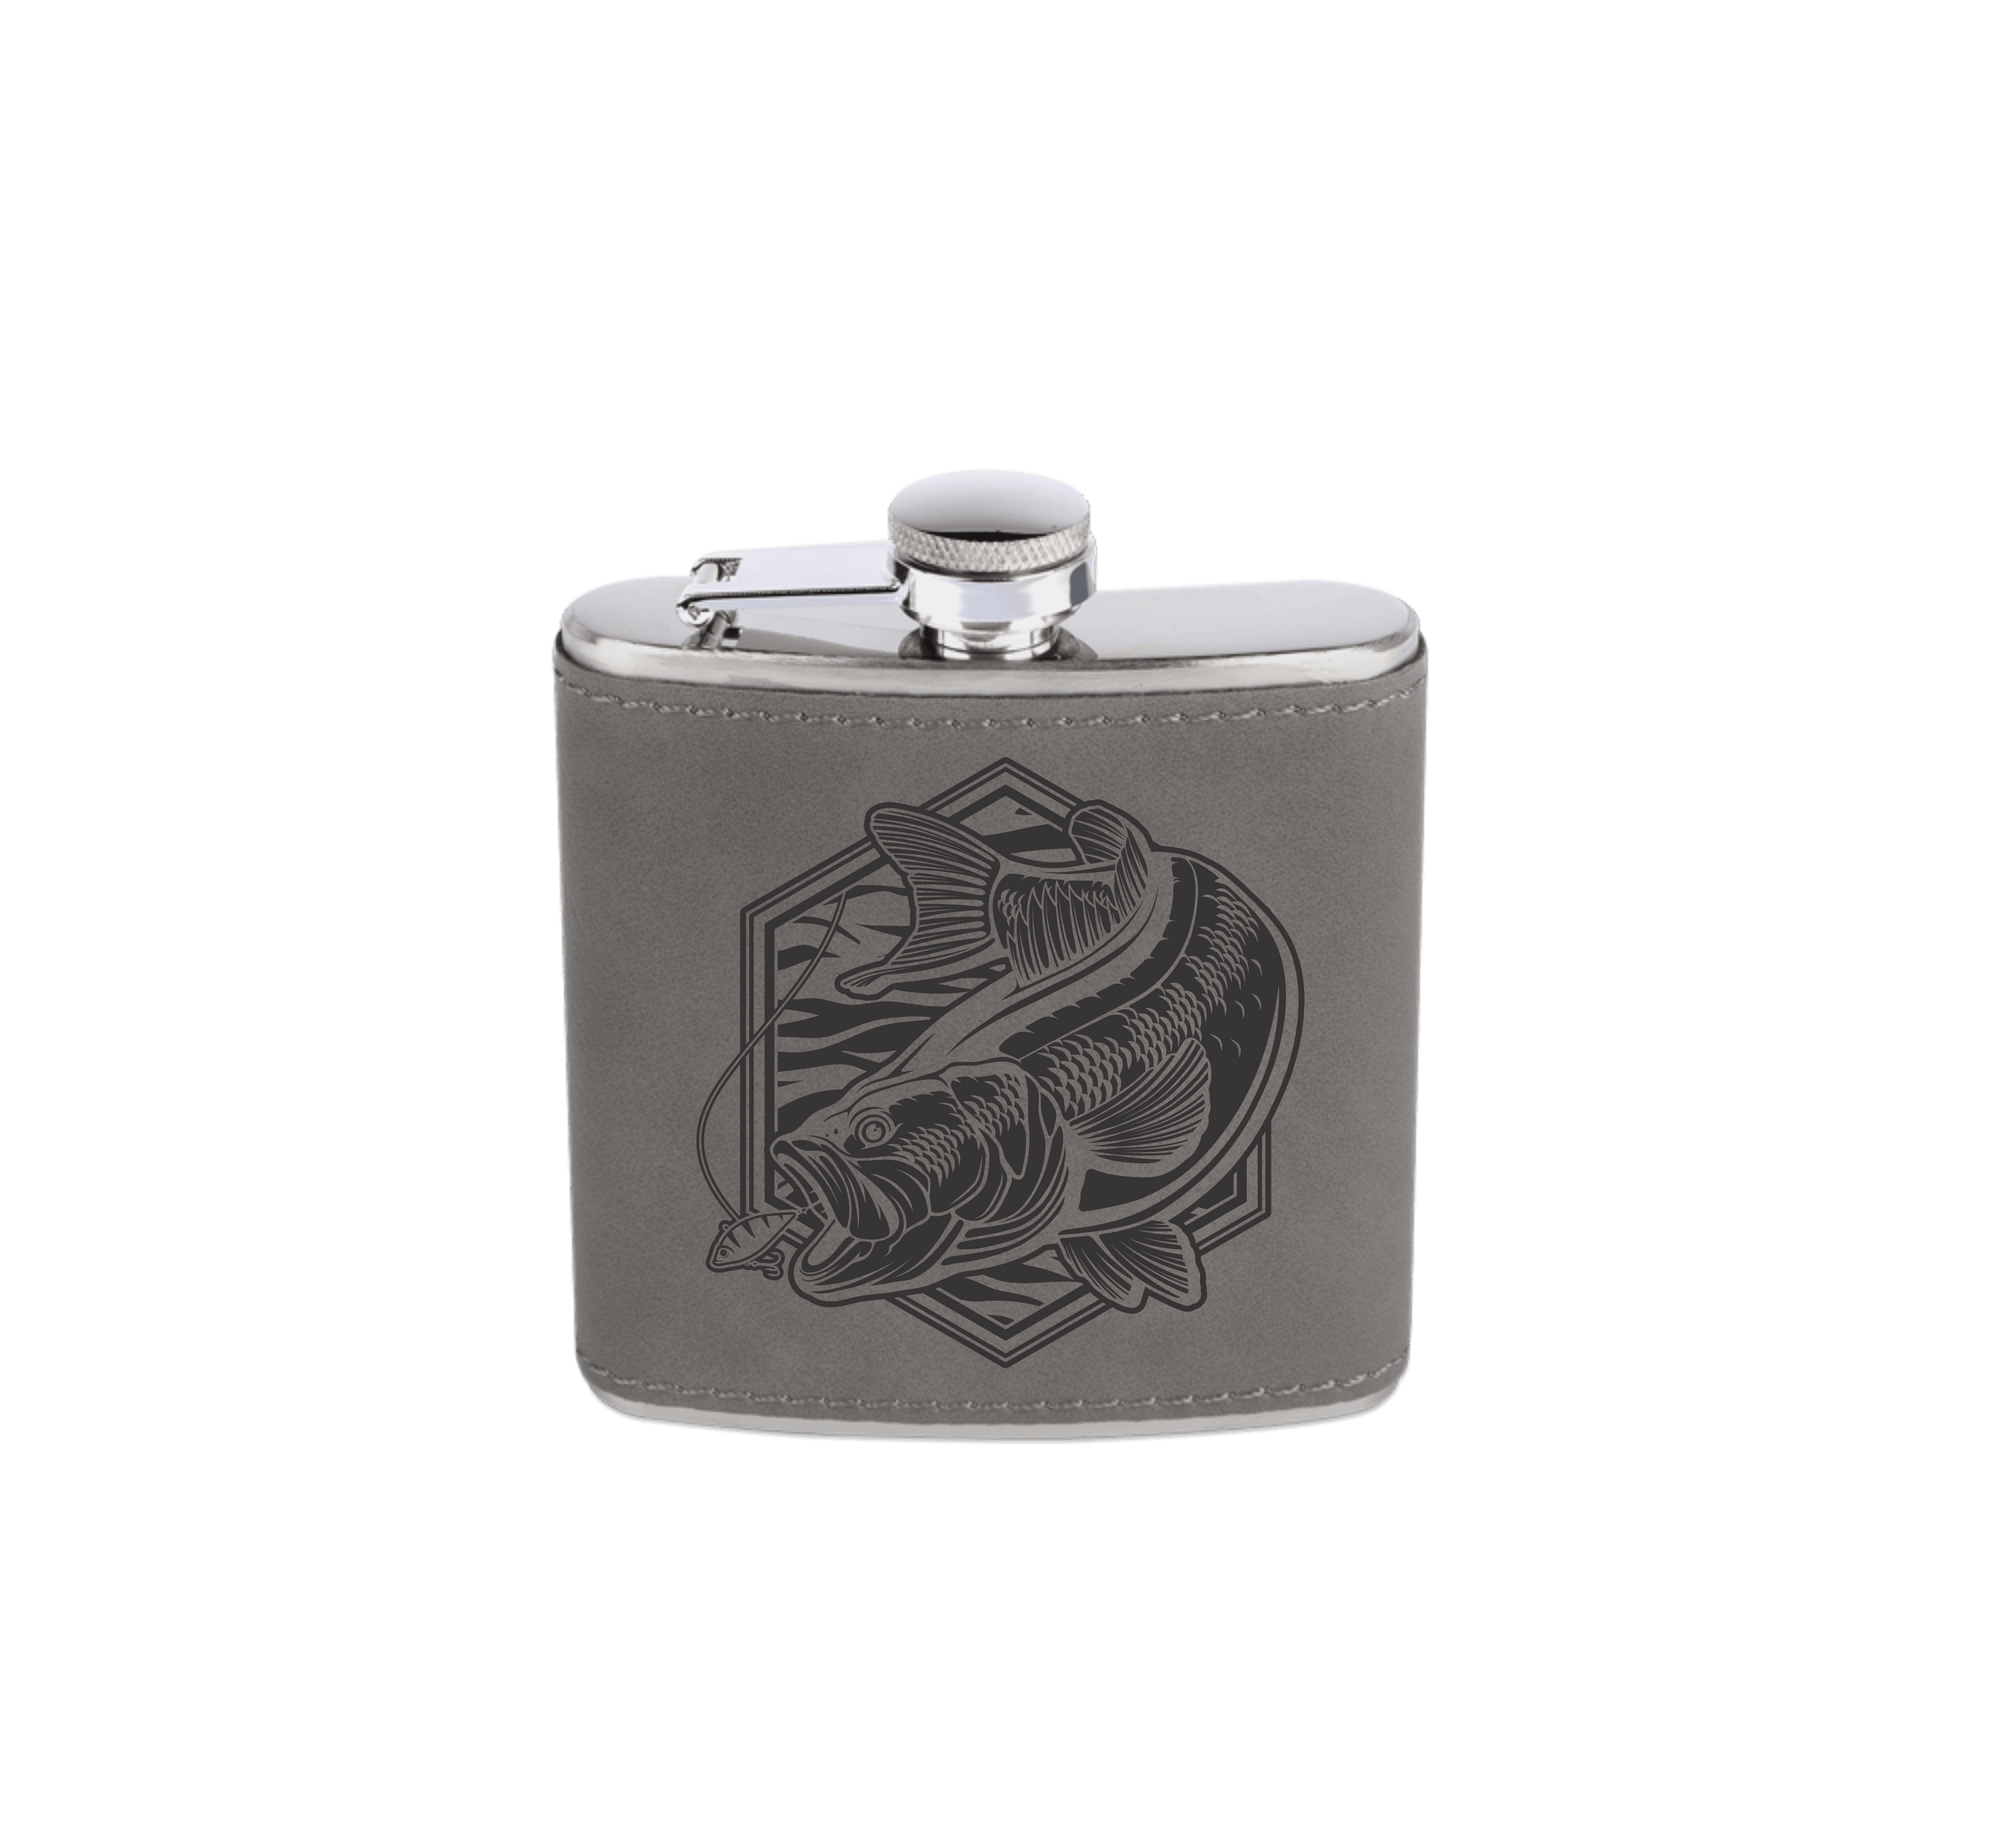 Bass Fishing Flask with bass artwork by Joel Jensen Art laser engraved - black on gray leather